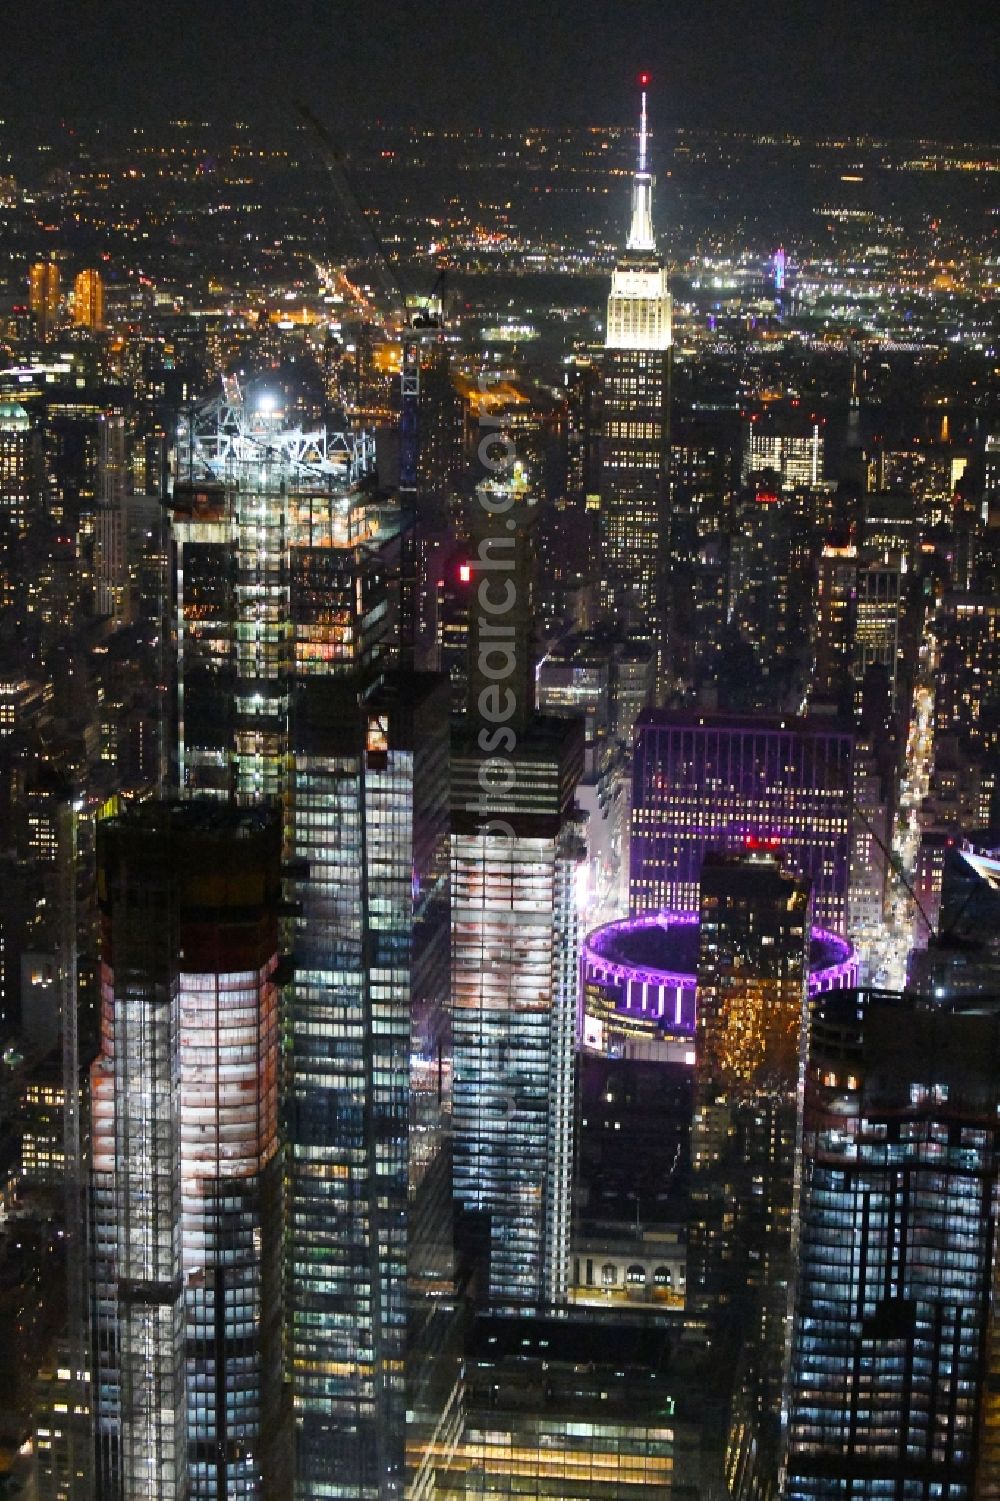 New York at night from above - Night lighting High-rise ensemble of on 33rd Street in New York in United States of America